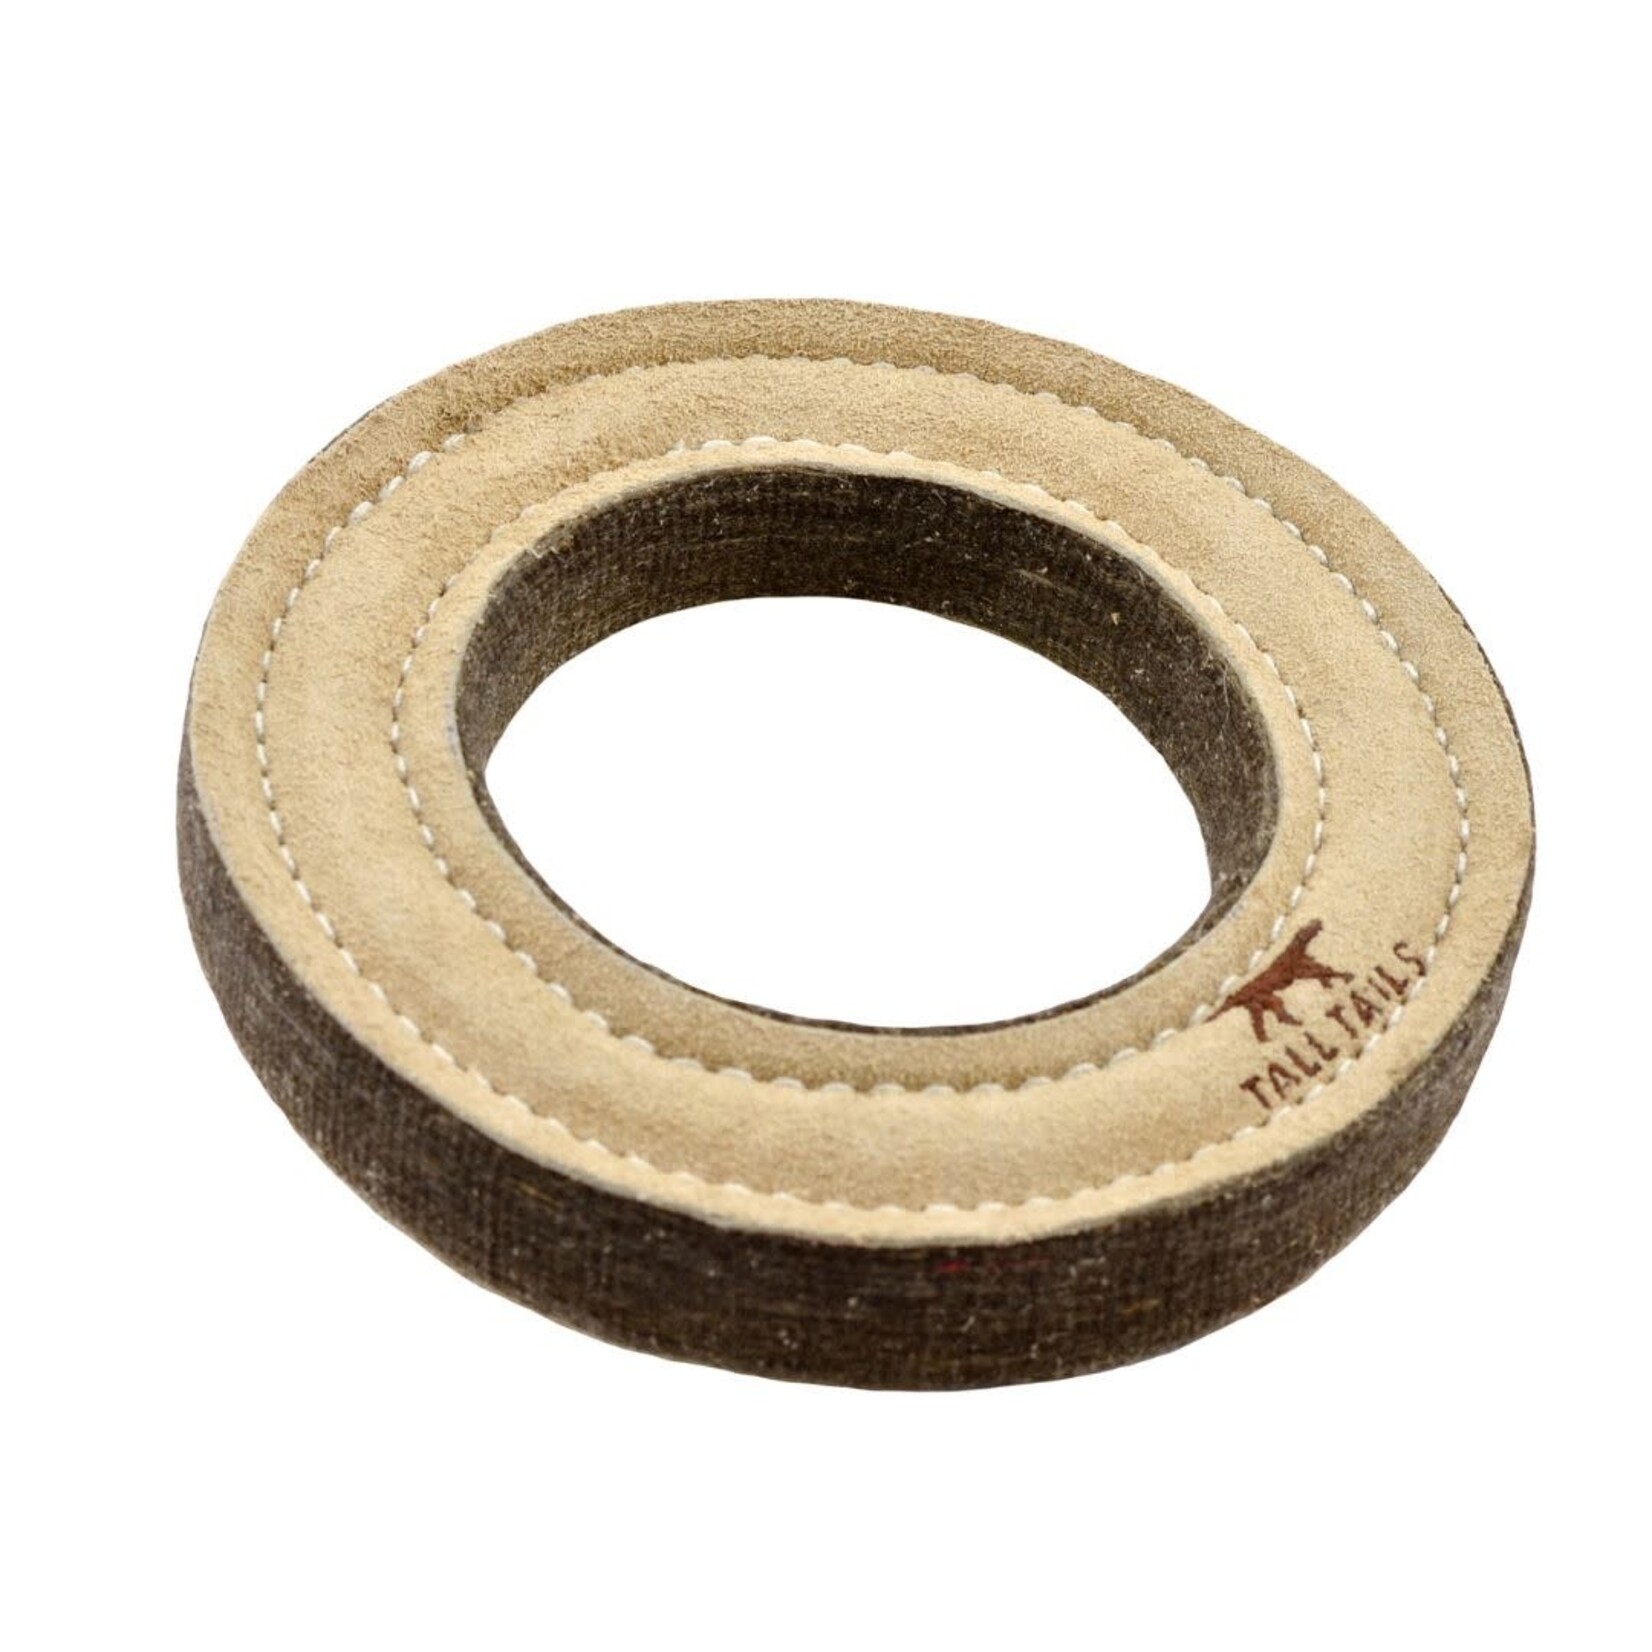 Tall Tails Tall Tails Natural Leather & Wool Ring Toy